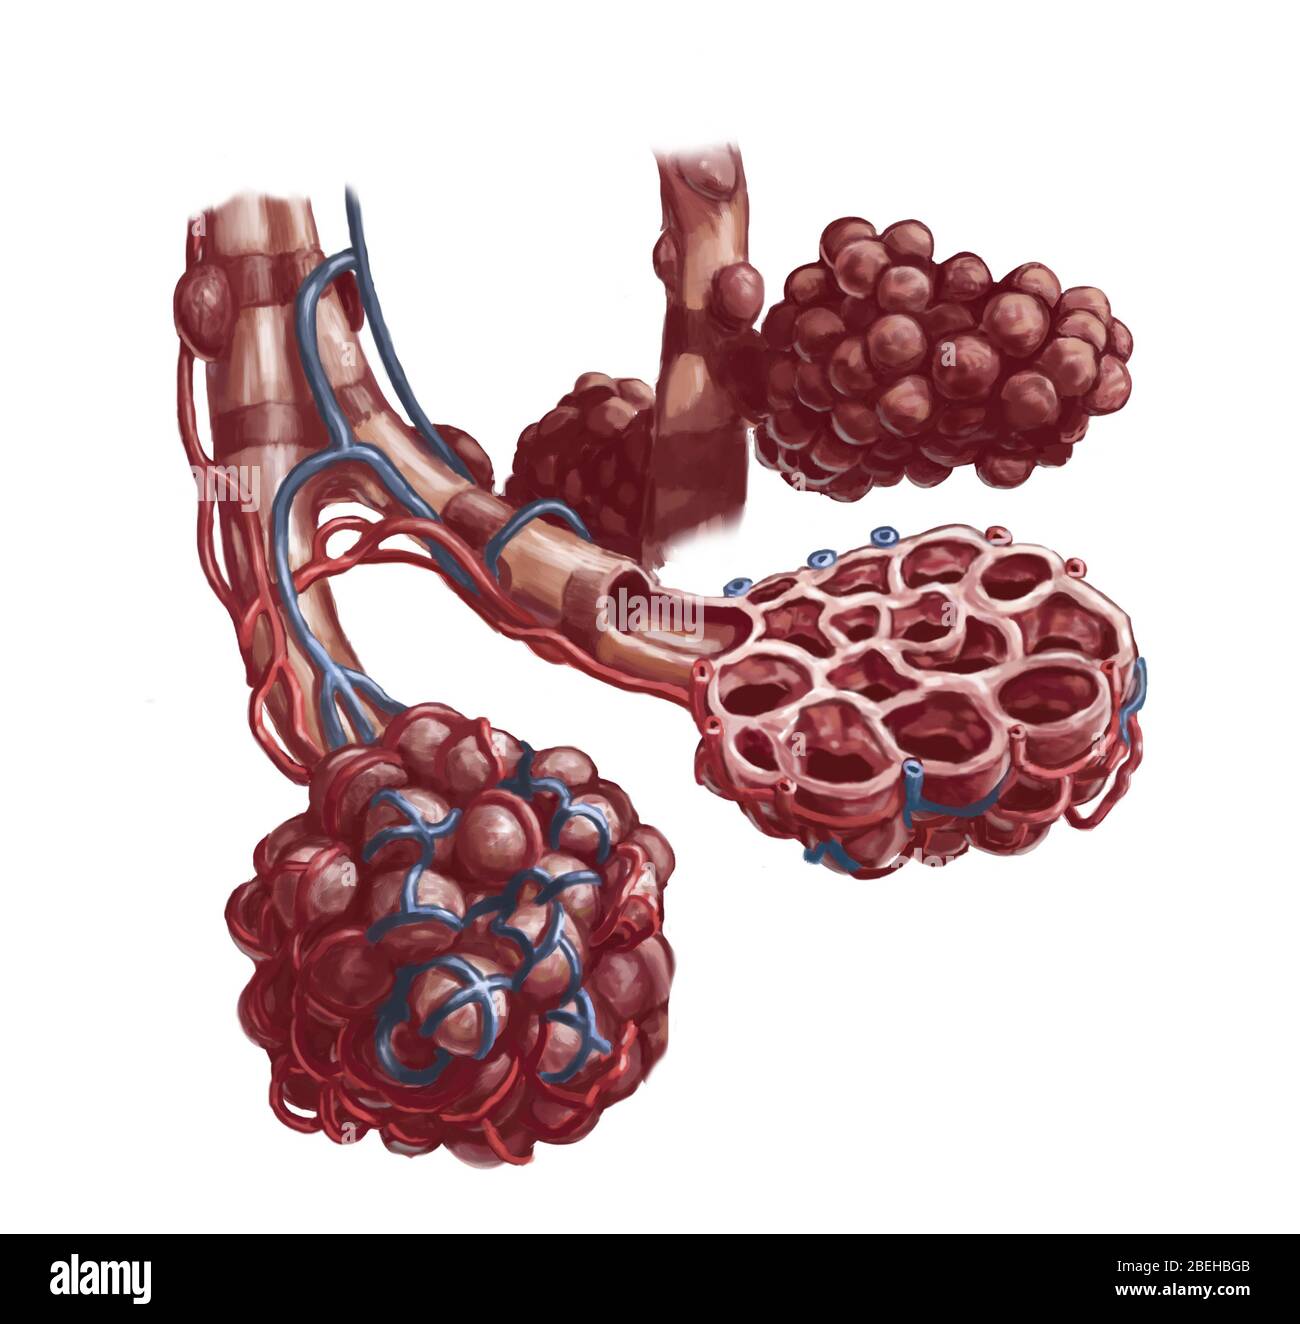 Aveoli, illustration. These are the many tiny air sacs of the lungs which allow for rapid gaseous exchange. Stock Photo